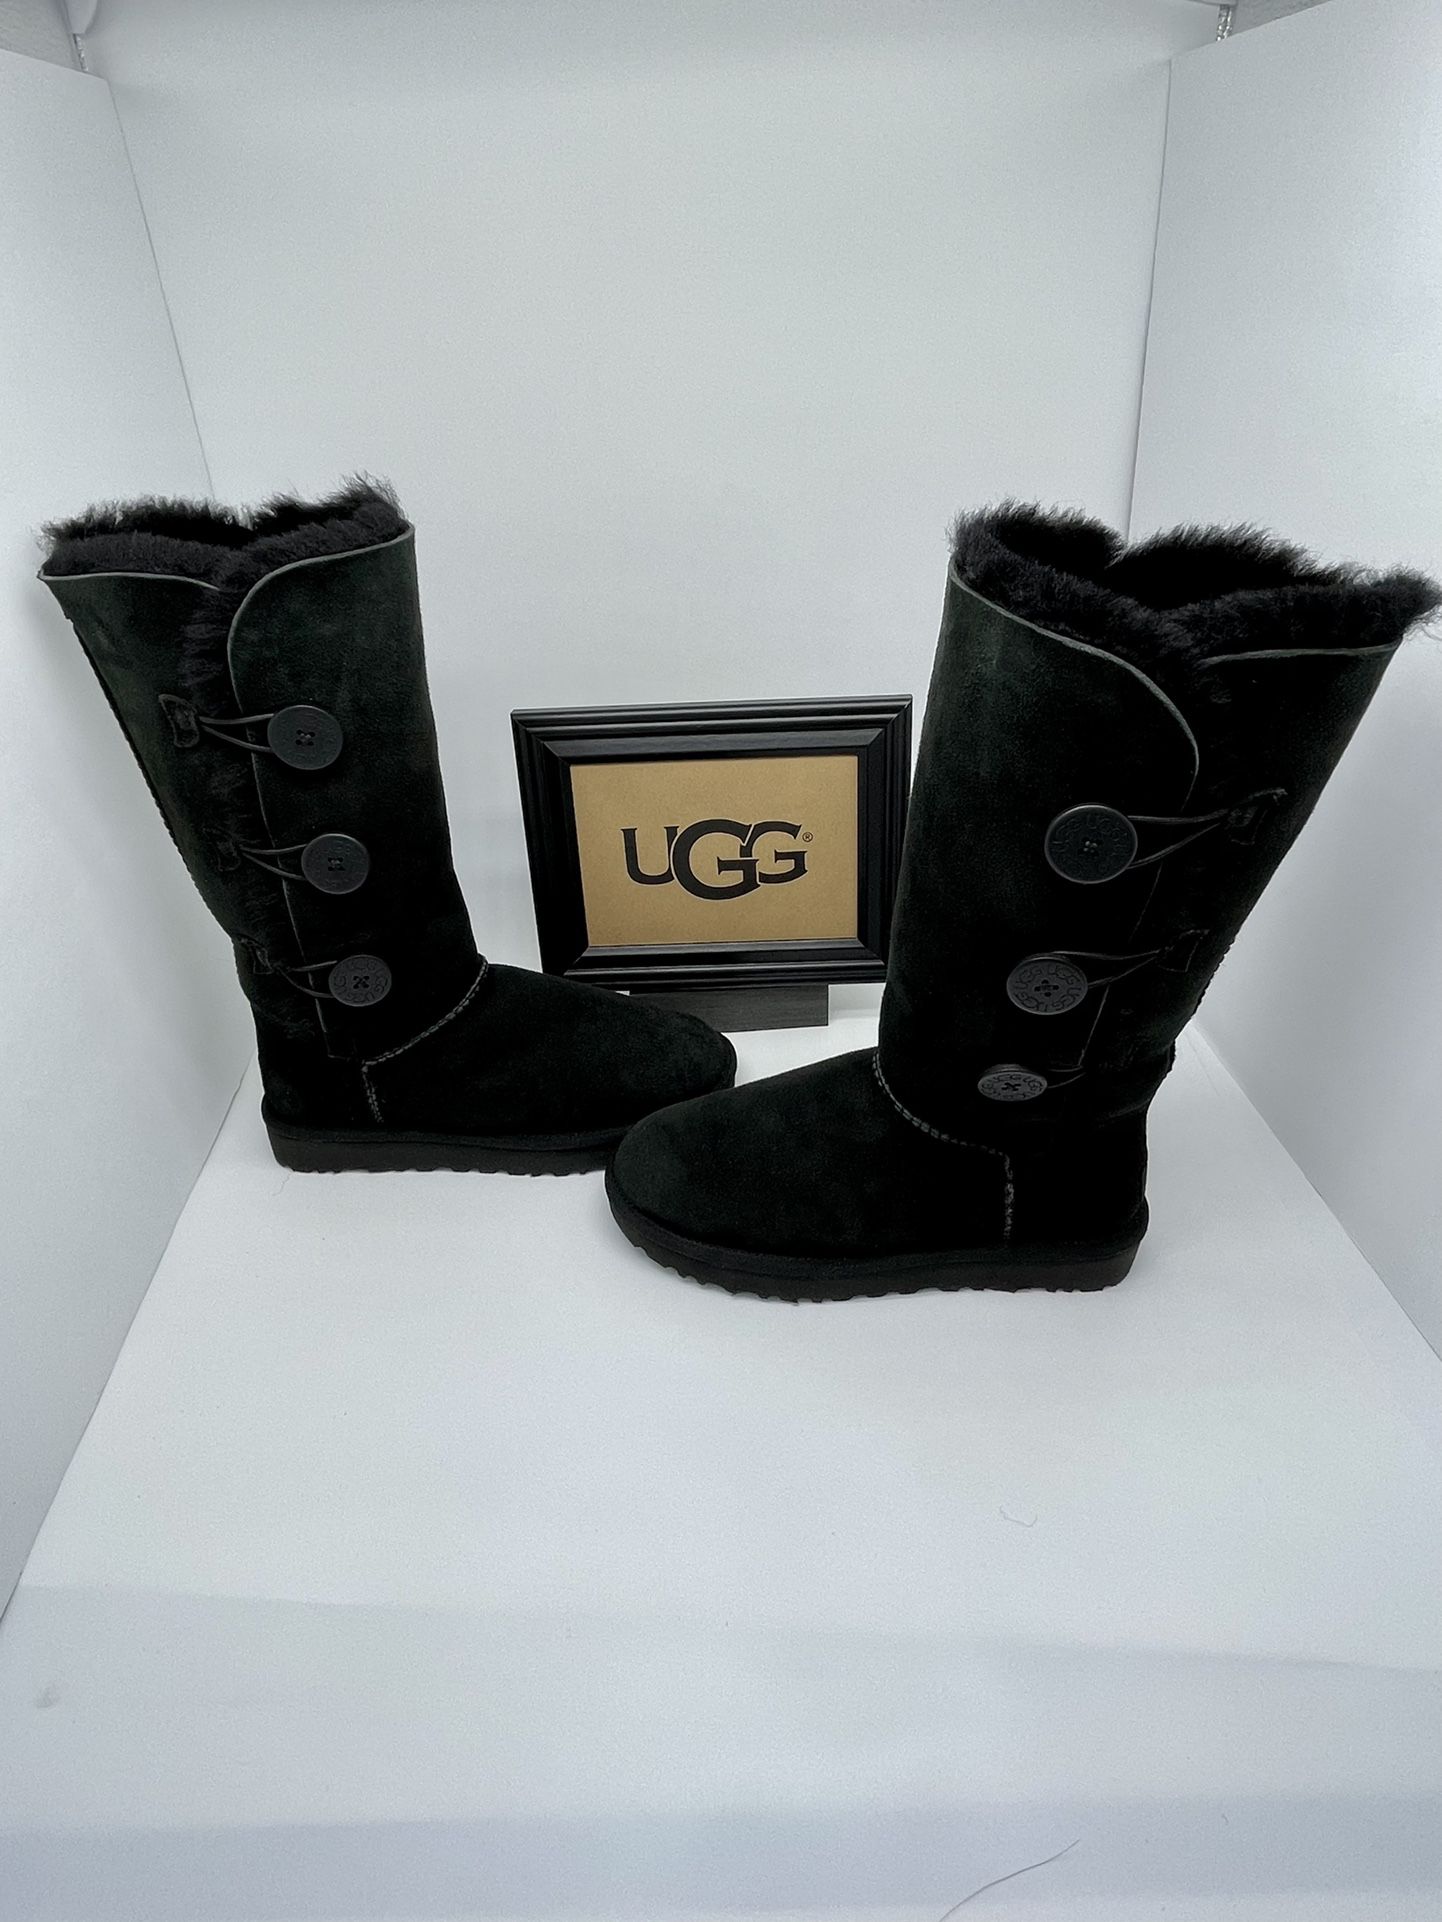 New: UGG Woman’s Triple Bailey Button Size 7